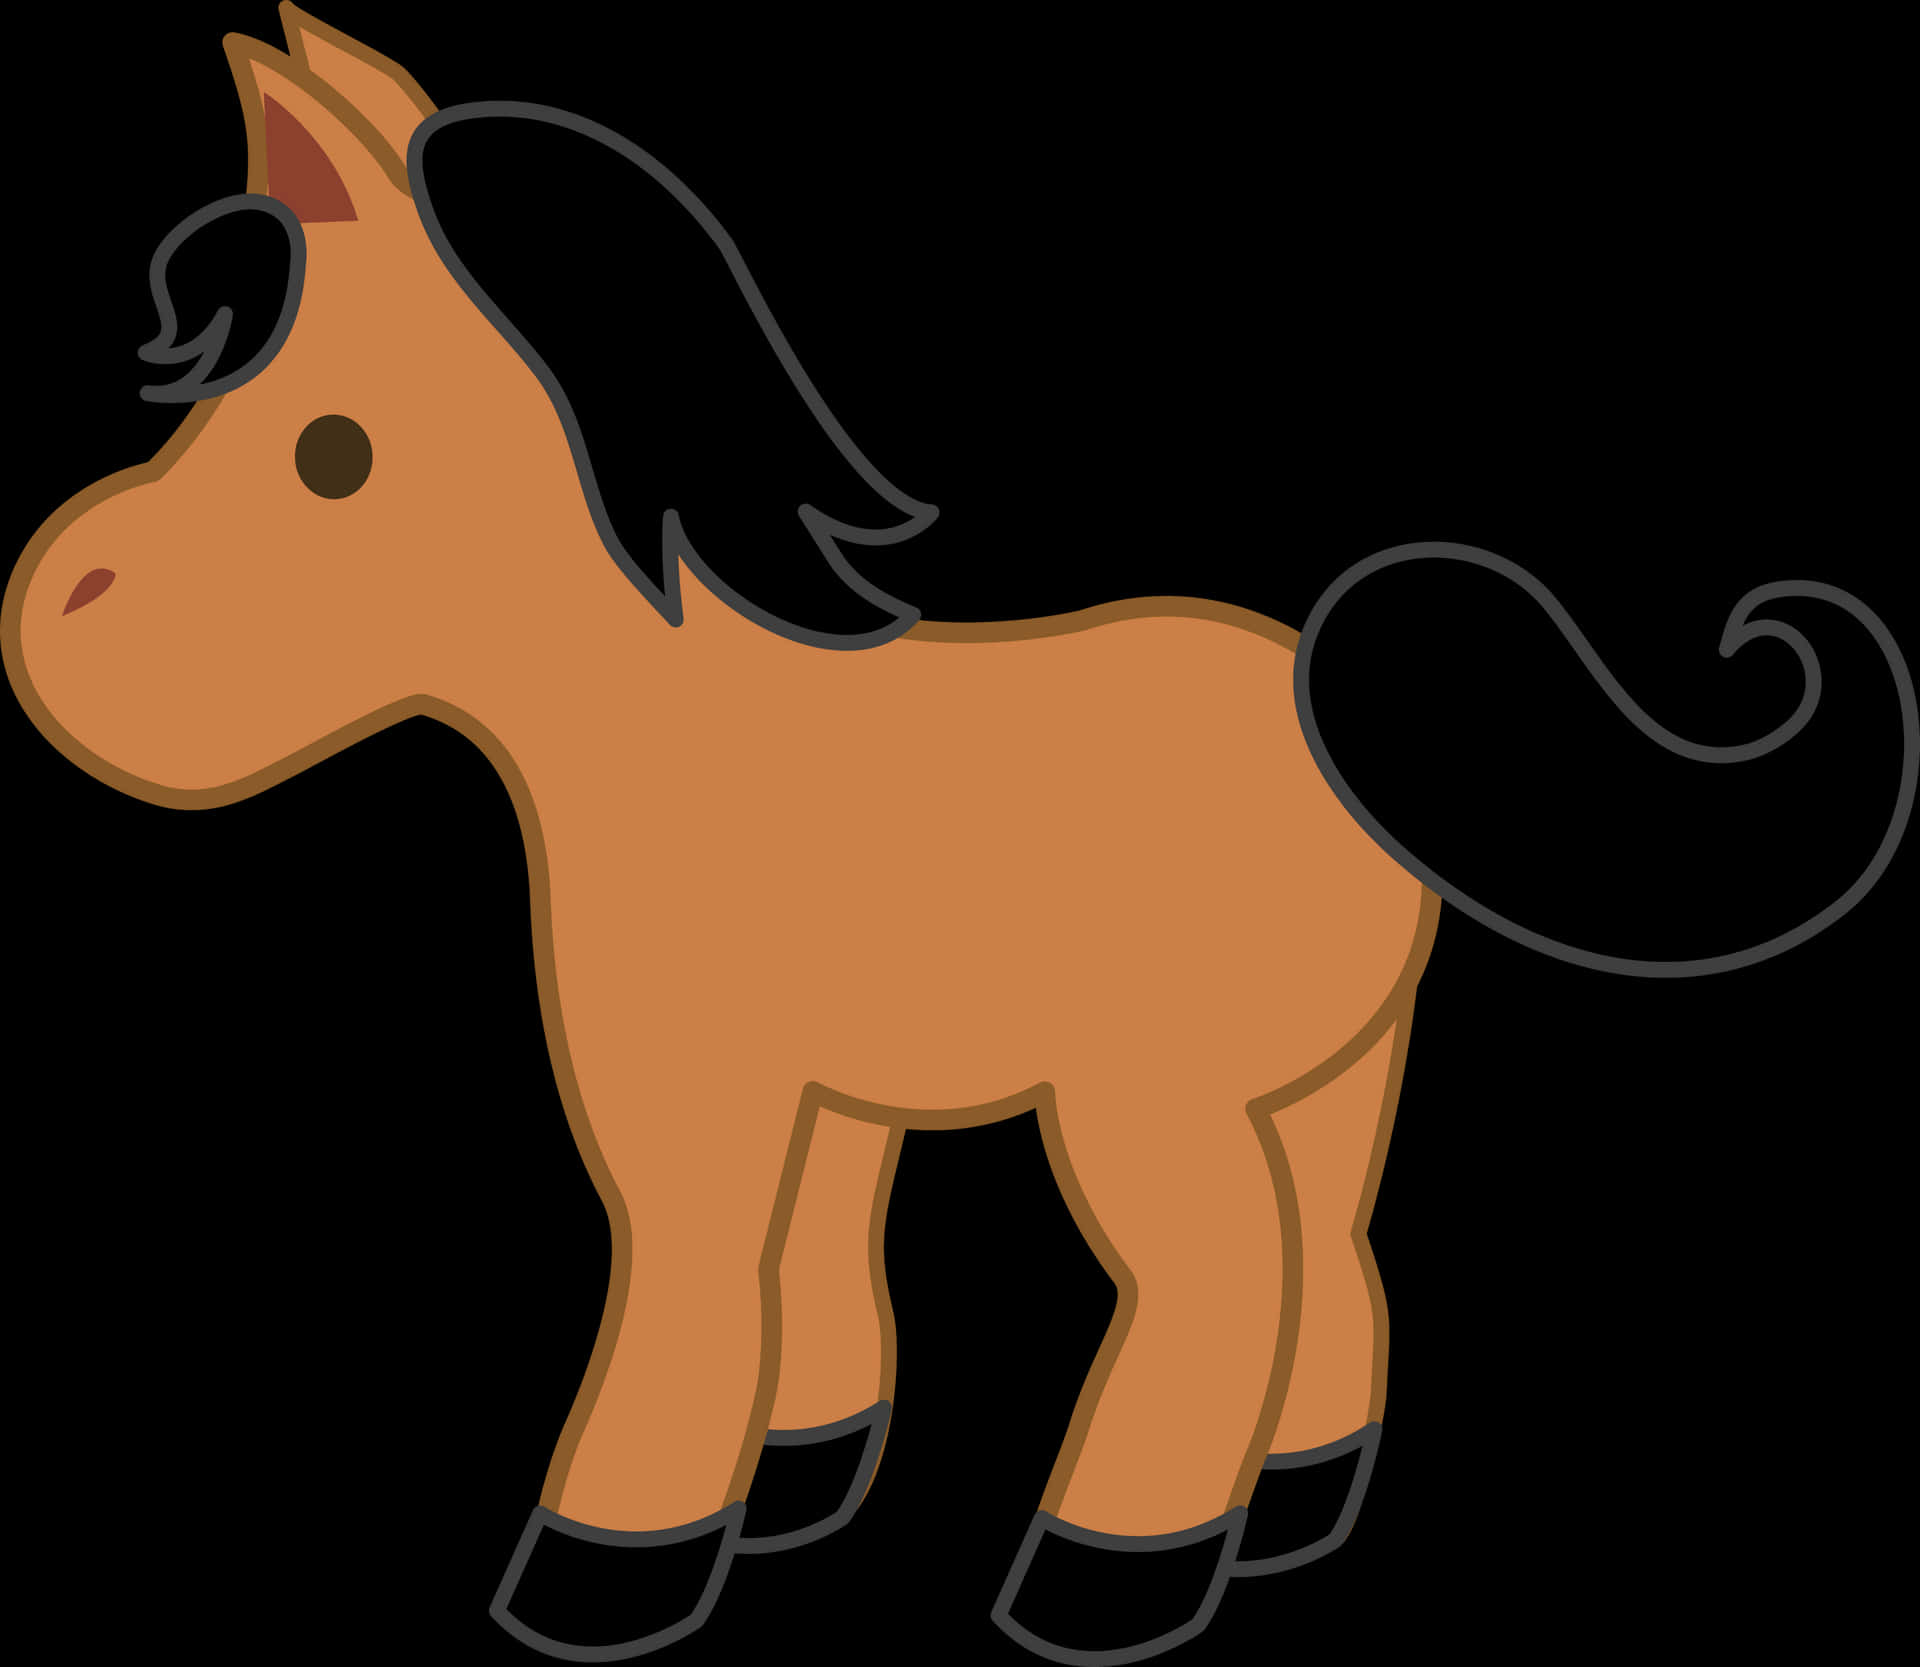 A Cartoon Horse With Black Mane And Tail